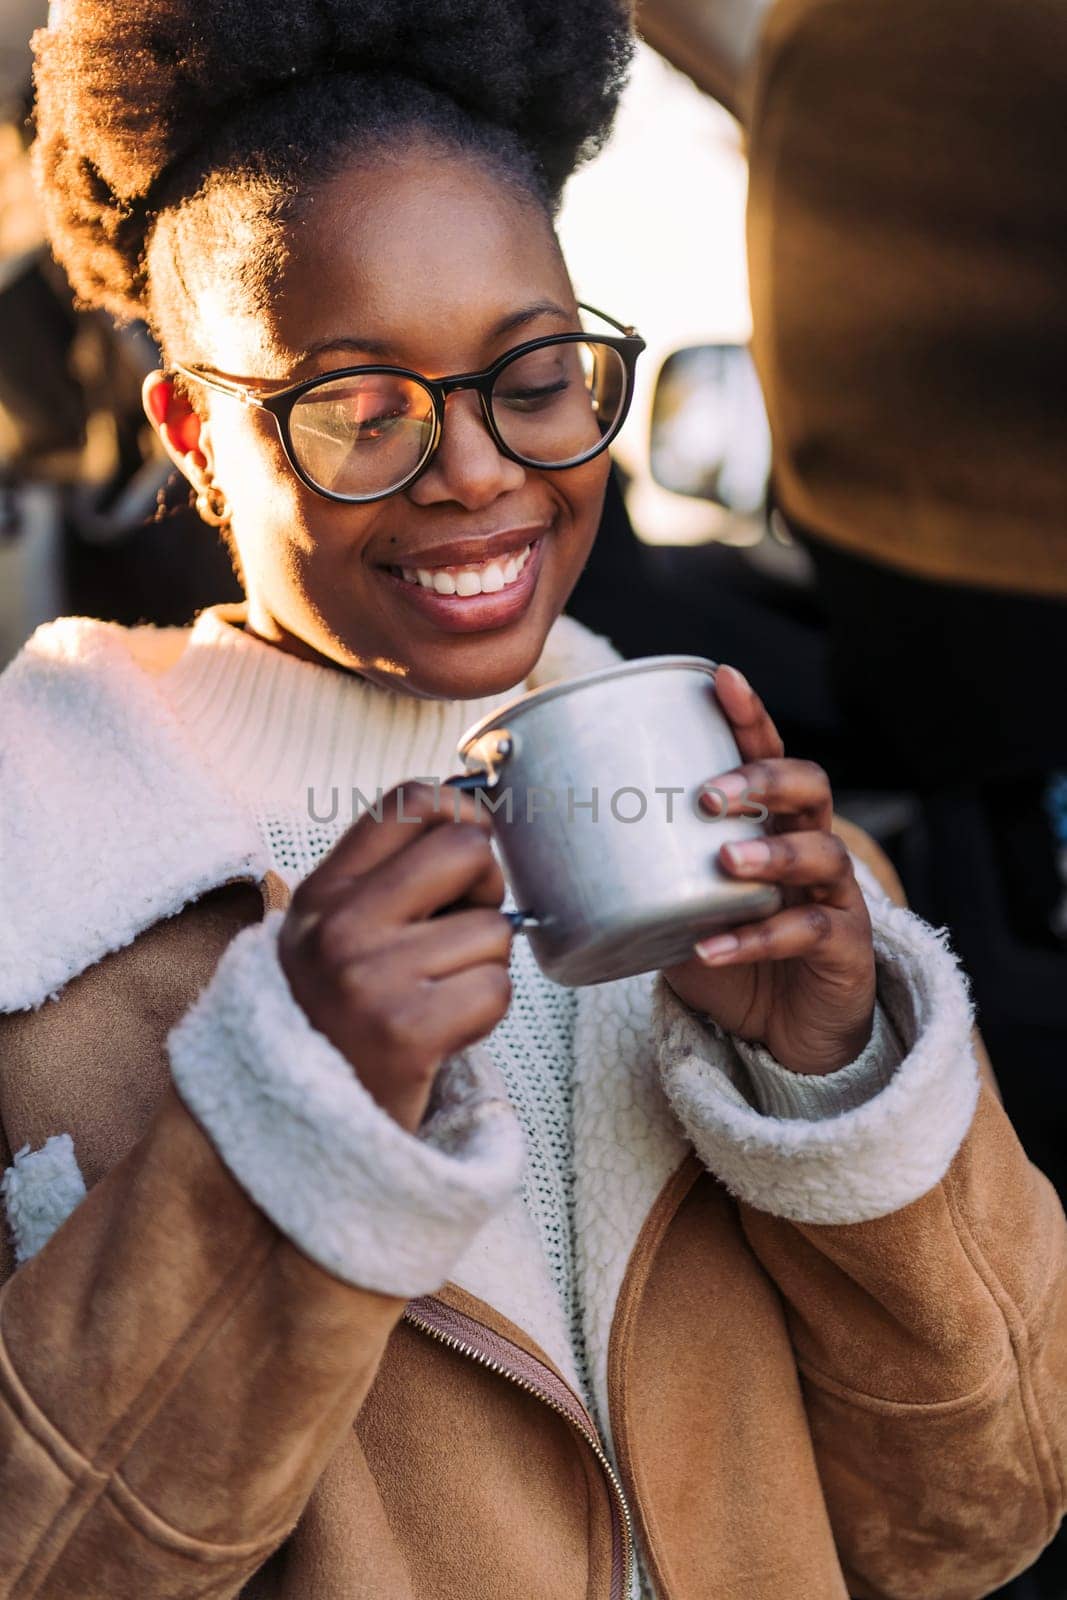 young black woman smiling happy sitting in a camper van drinking a cup of coffee at sunset, concept of van life and weekend getaway